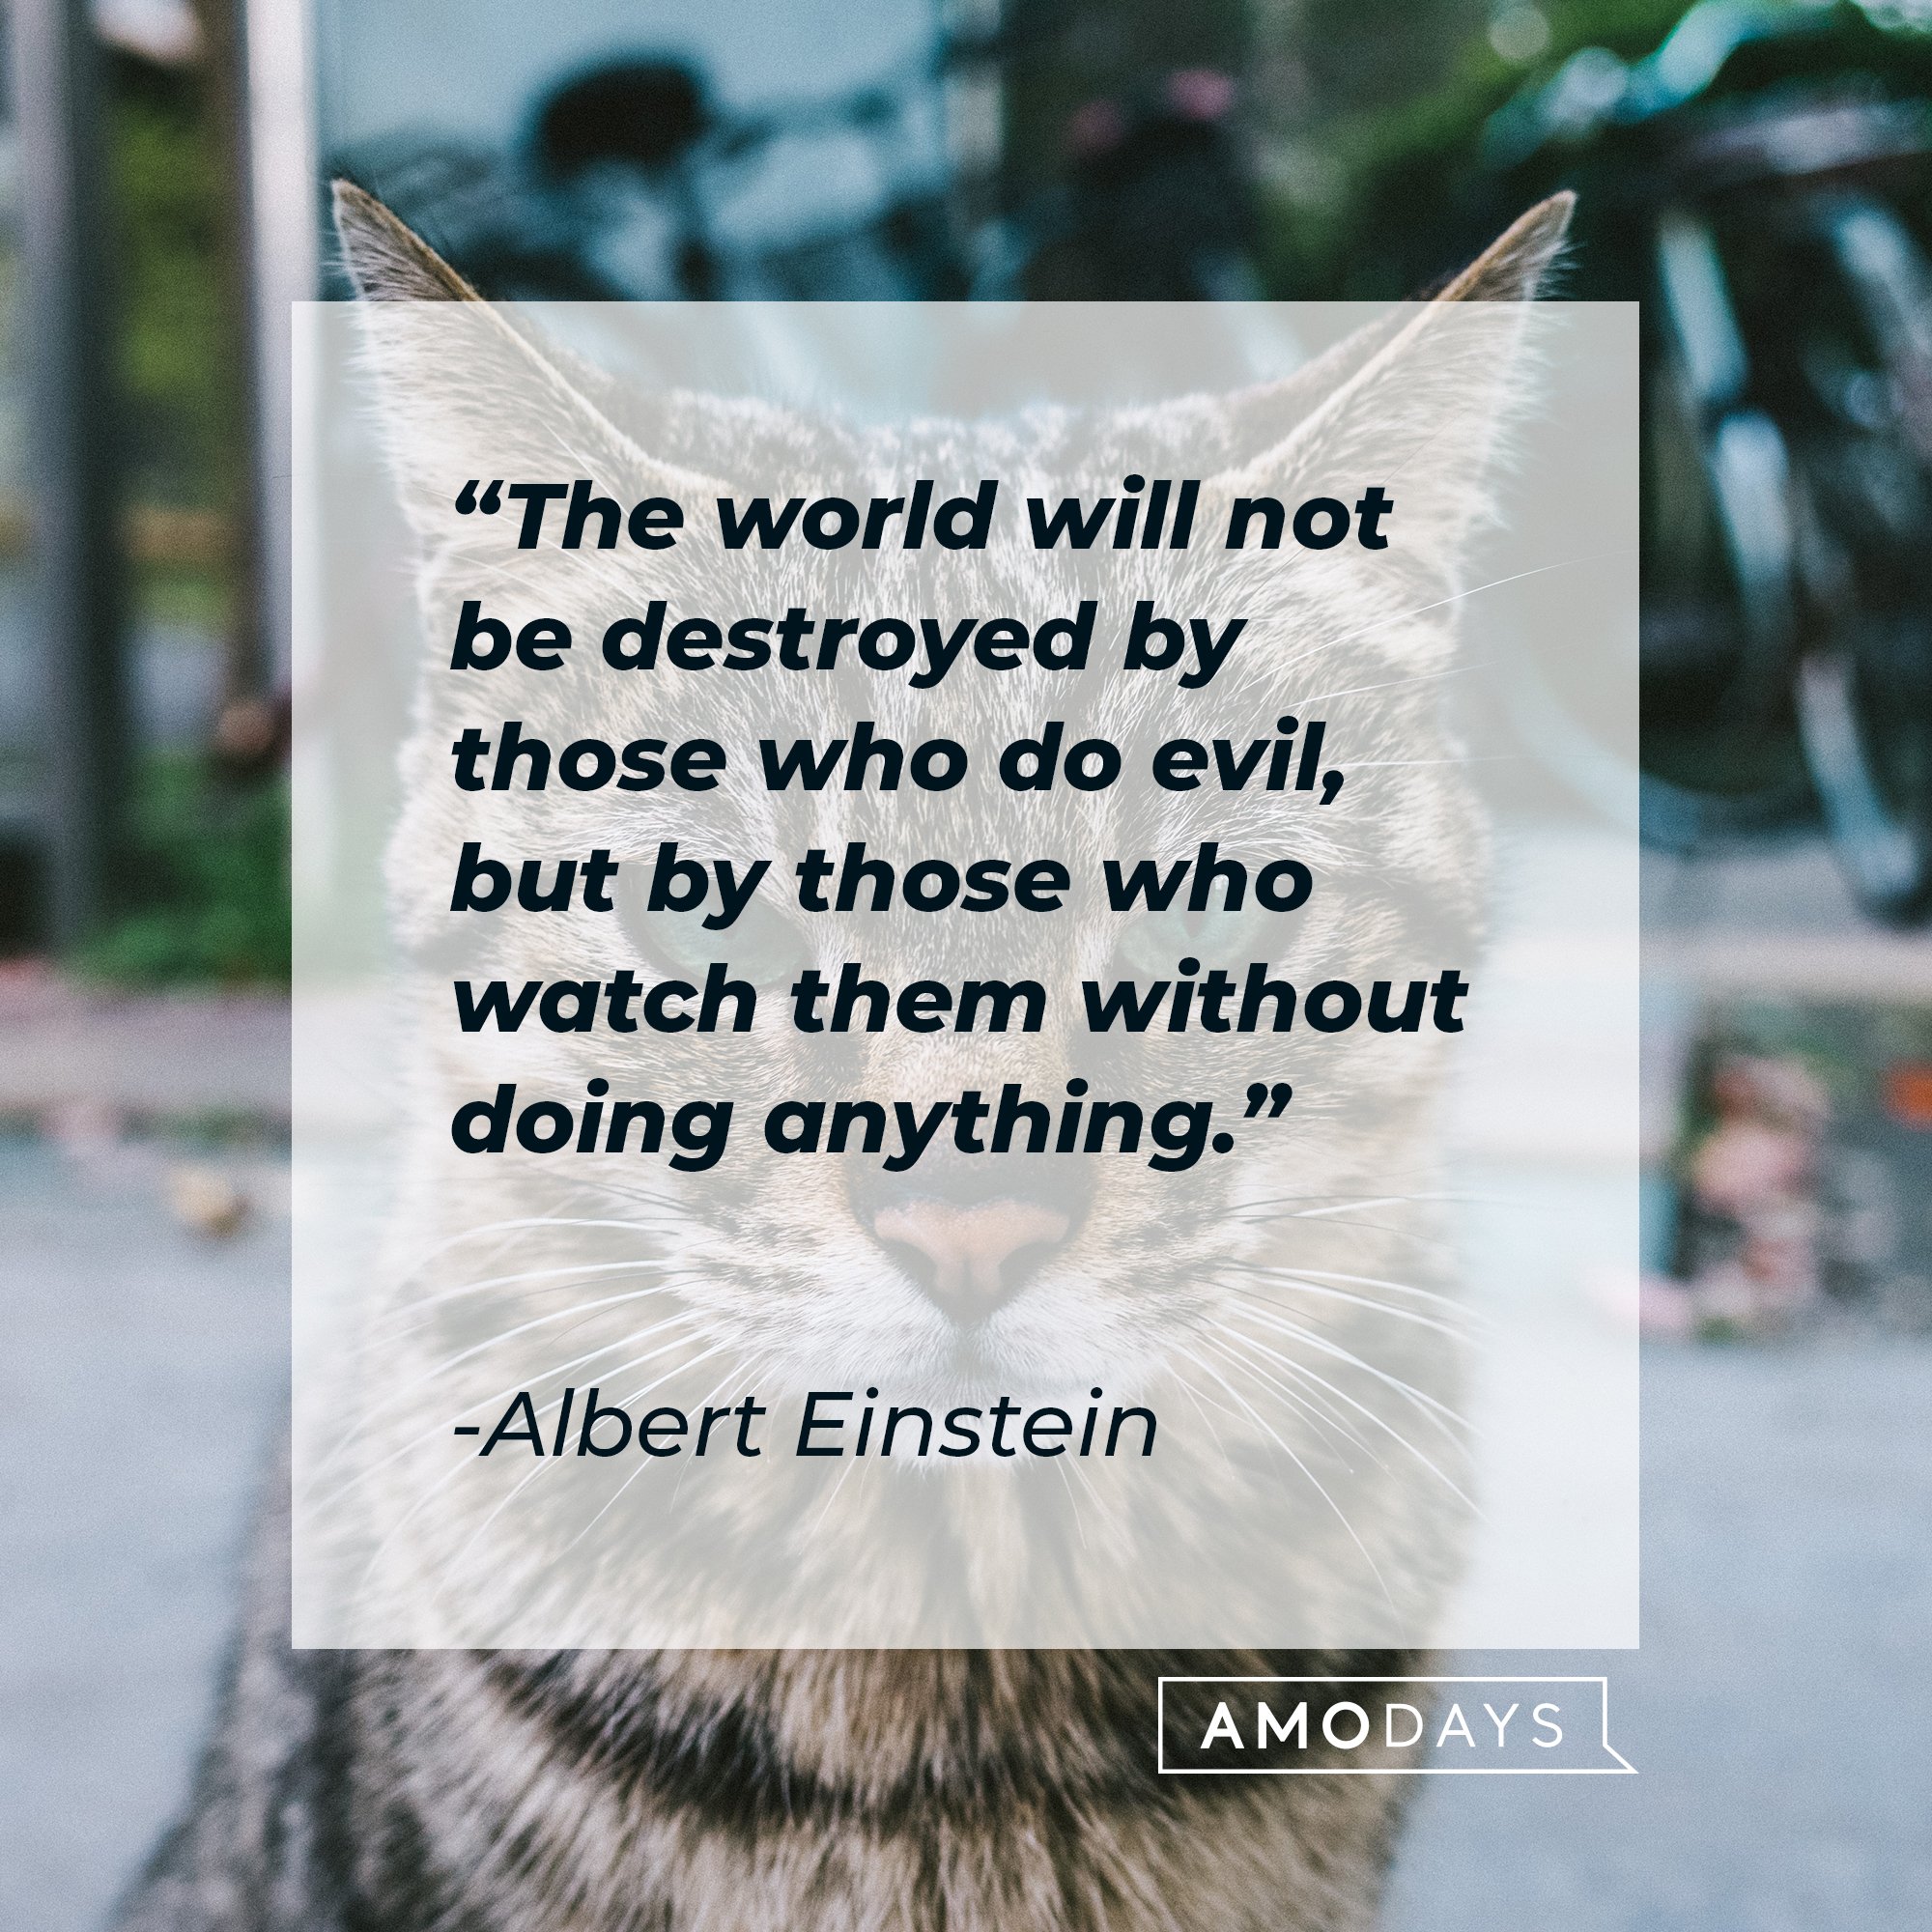 Albert Einstein's quote: "The world will not be destroyed by those who do evil, but by those who watch them without doing anything." | Image: AmoDays